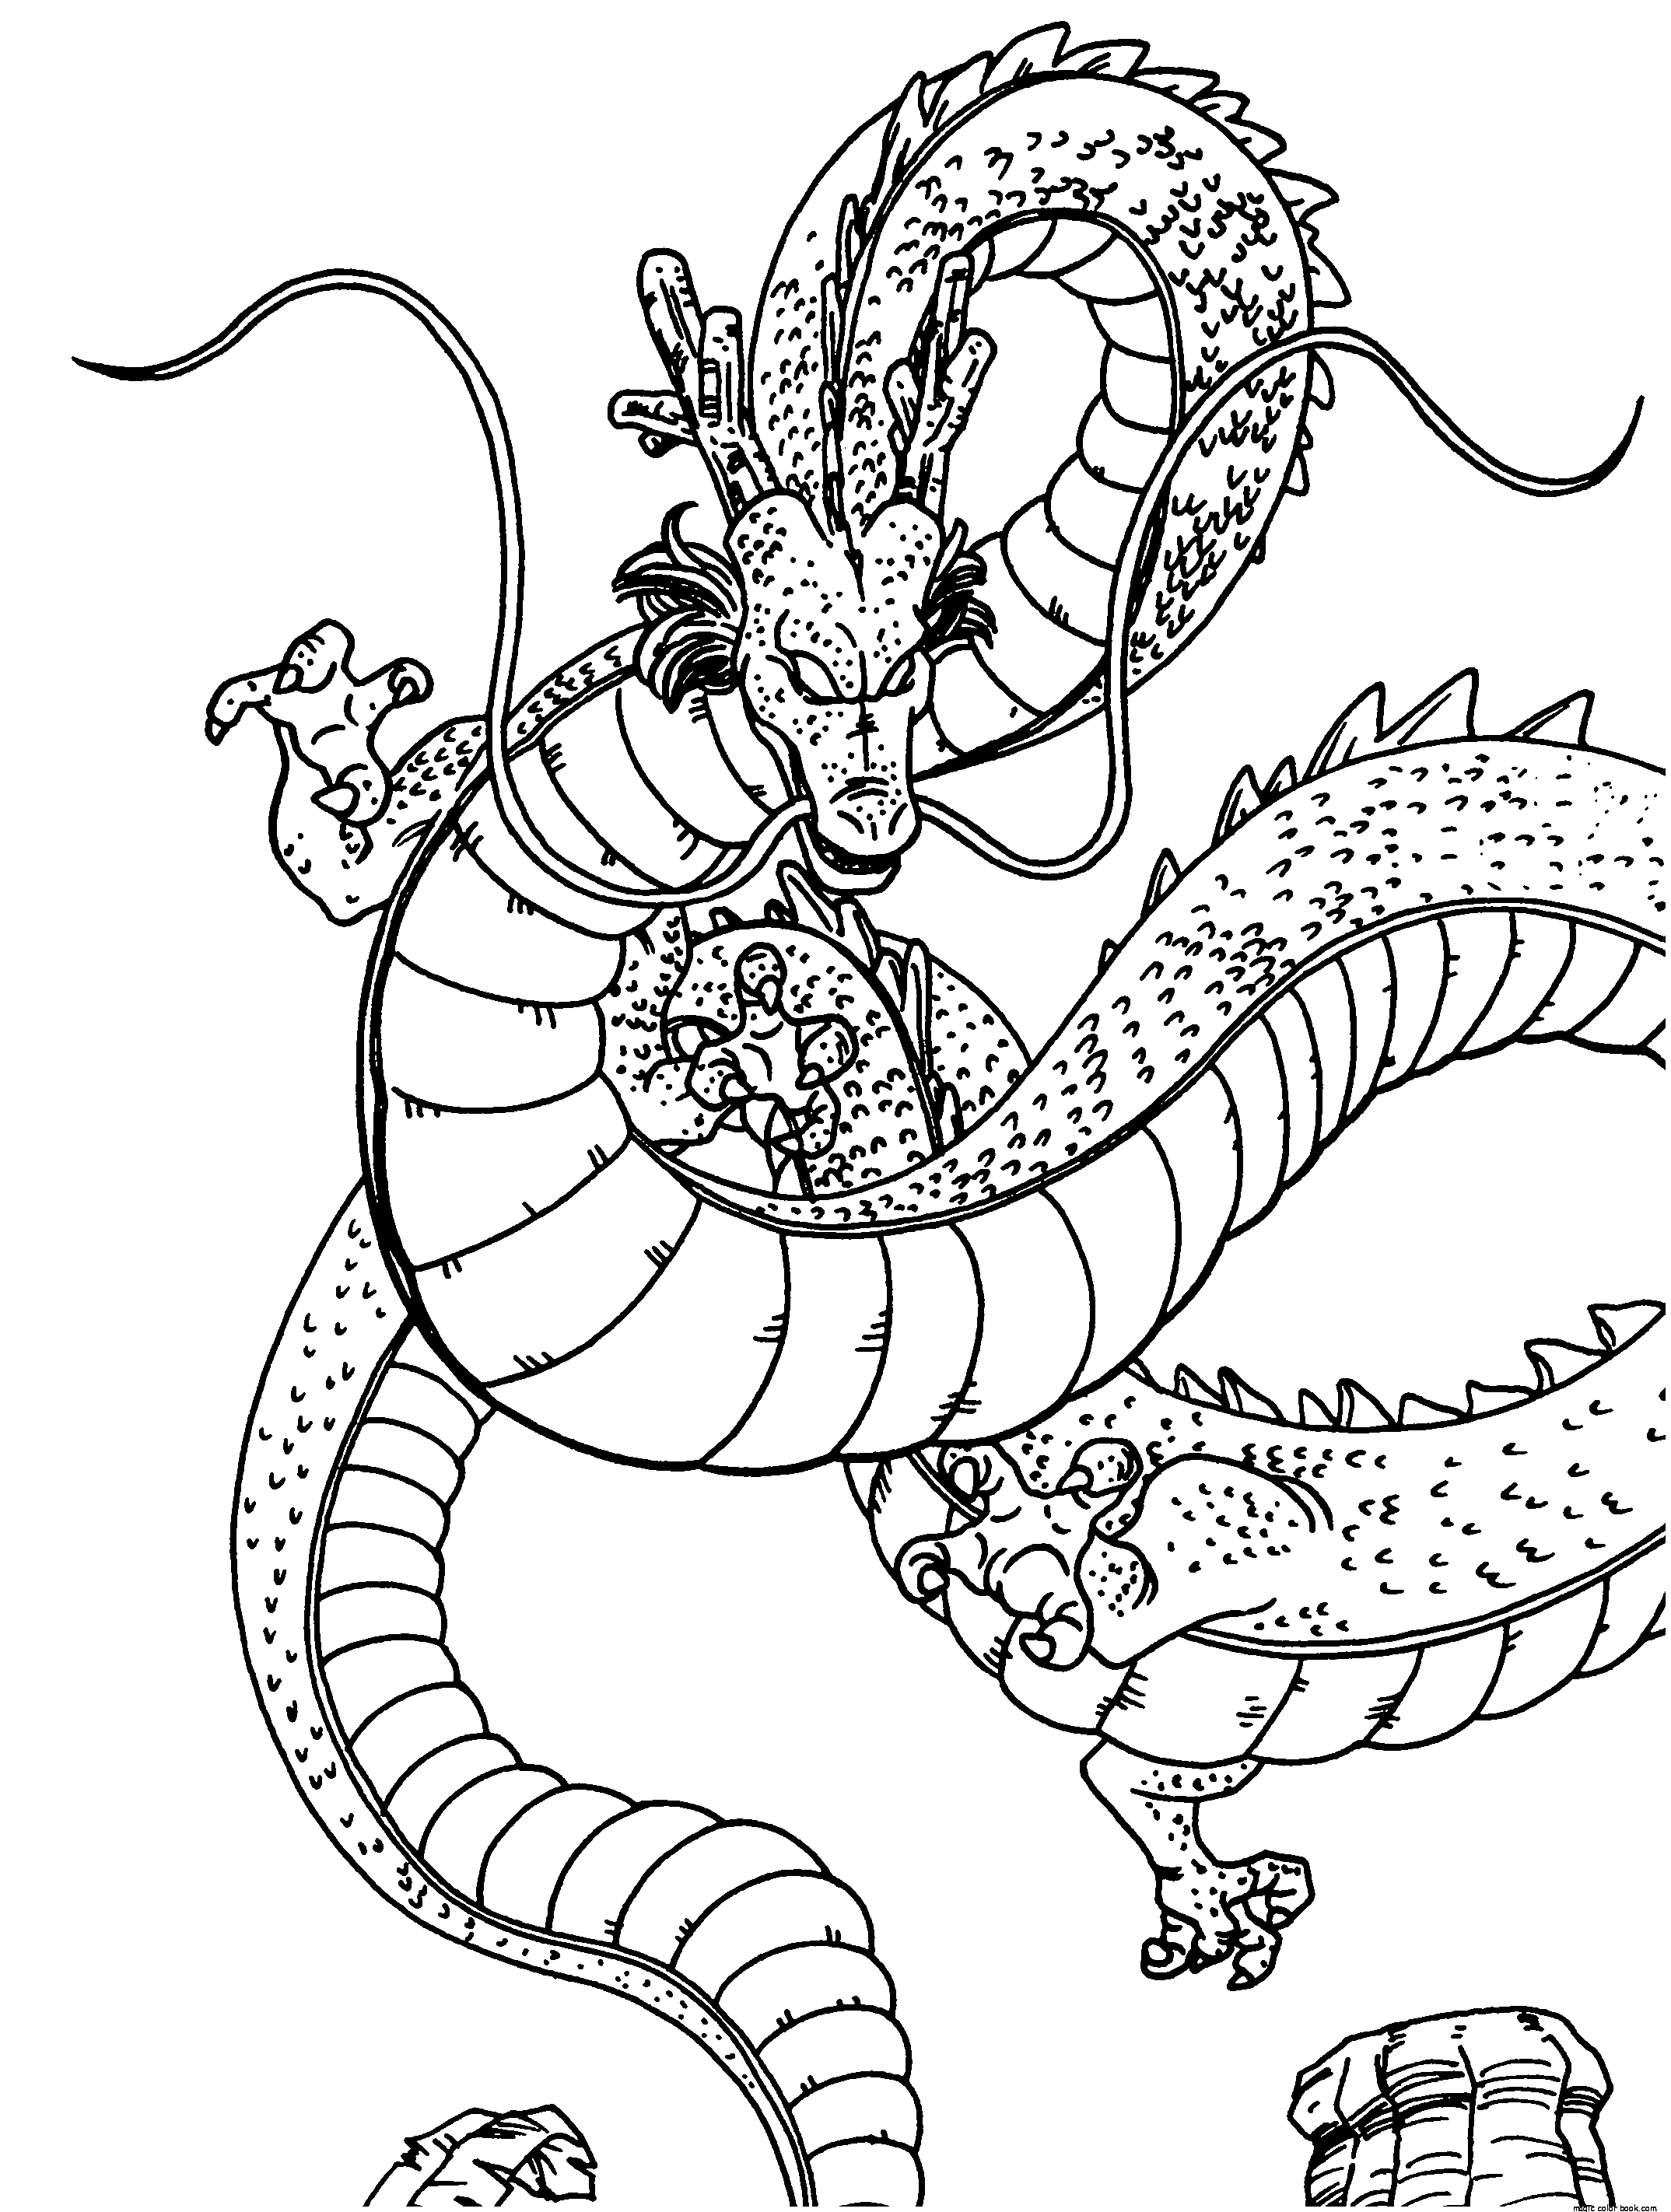 dragon coloring pictures dragon coloring pages to download and print for free pictures coloring dragon 